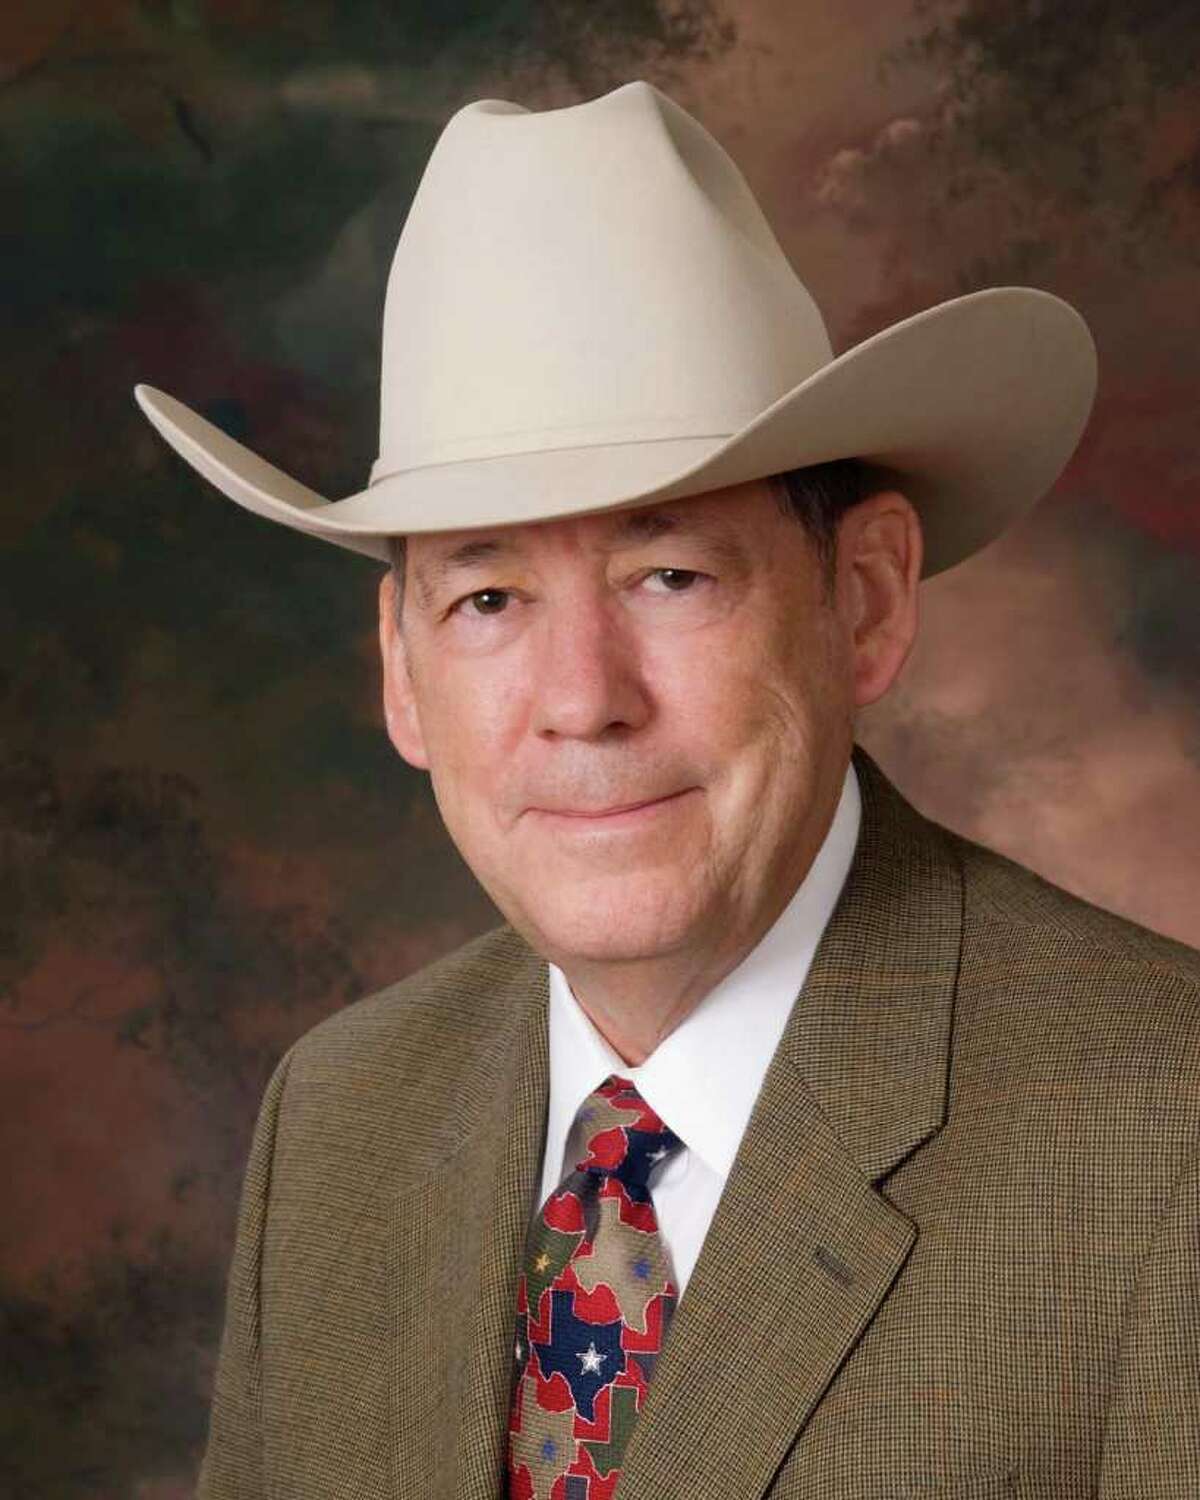 Shafer served the rodeo for 40 years.